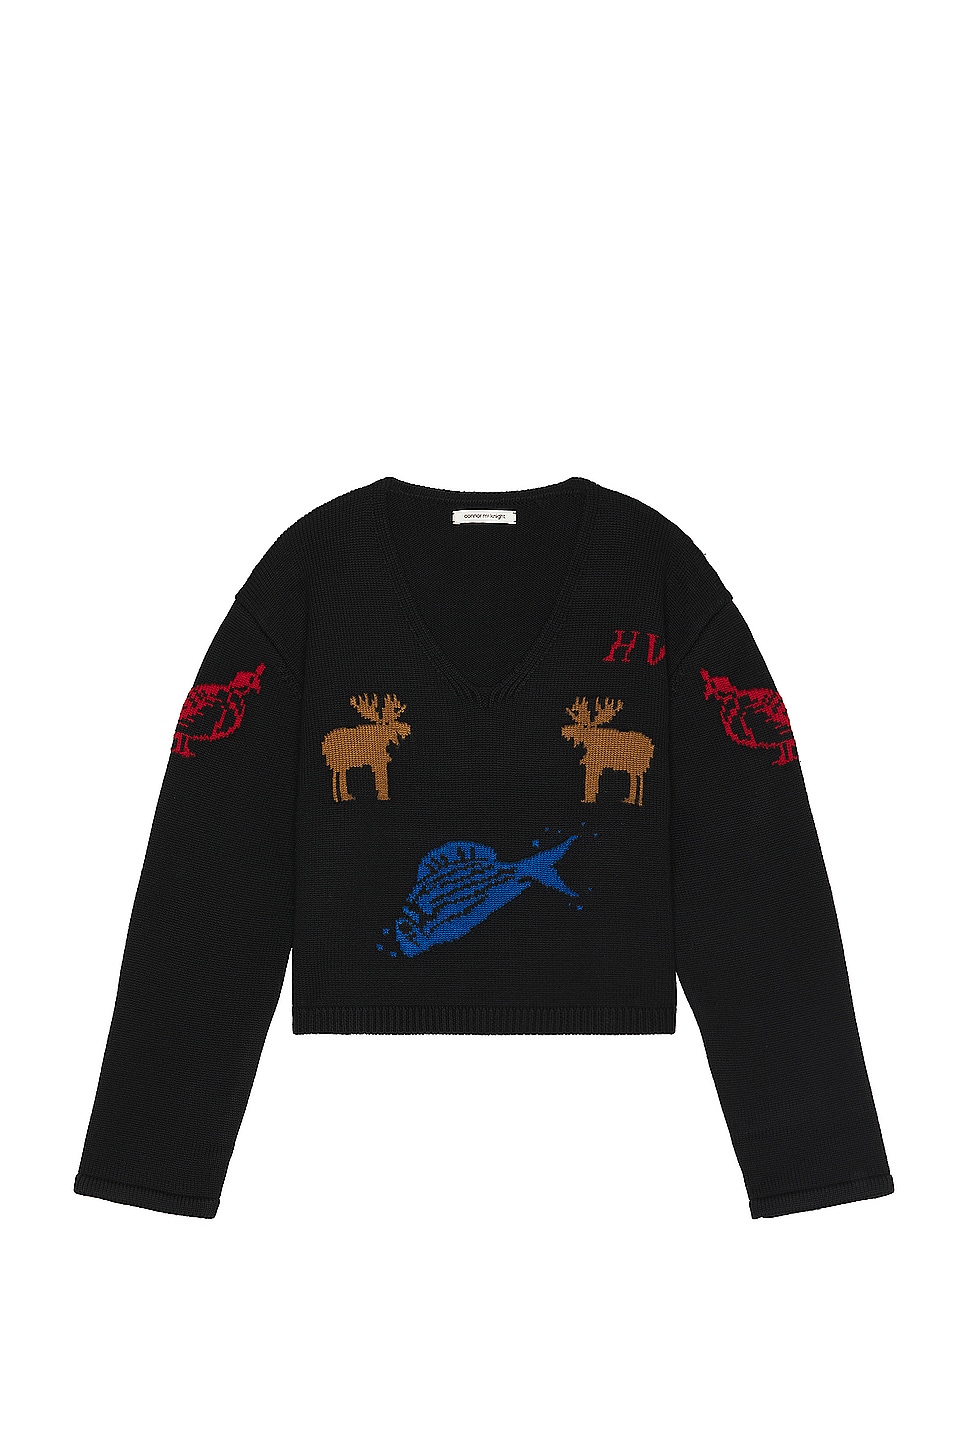 Image 1 of Connor McKnight Fish & Game Hunting Sweater in Black